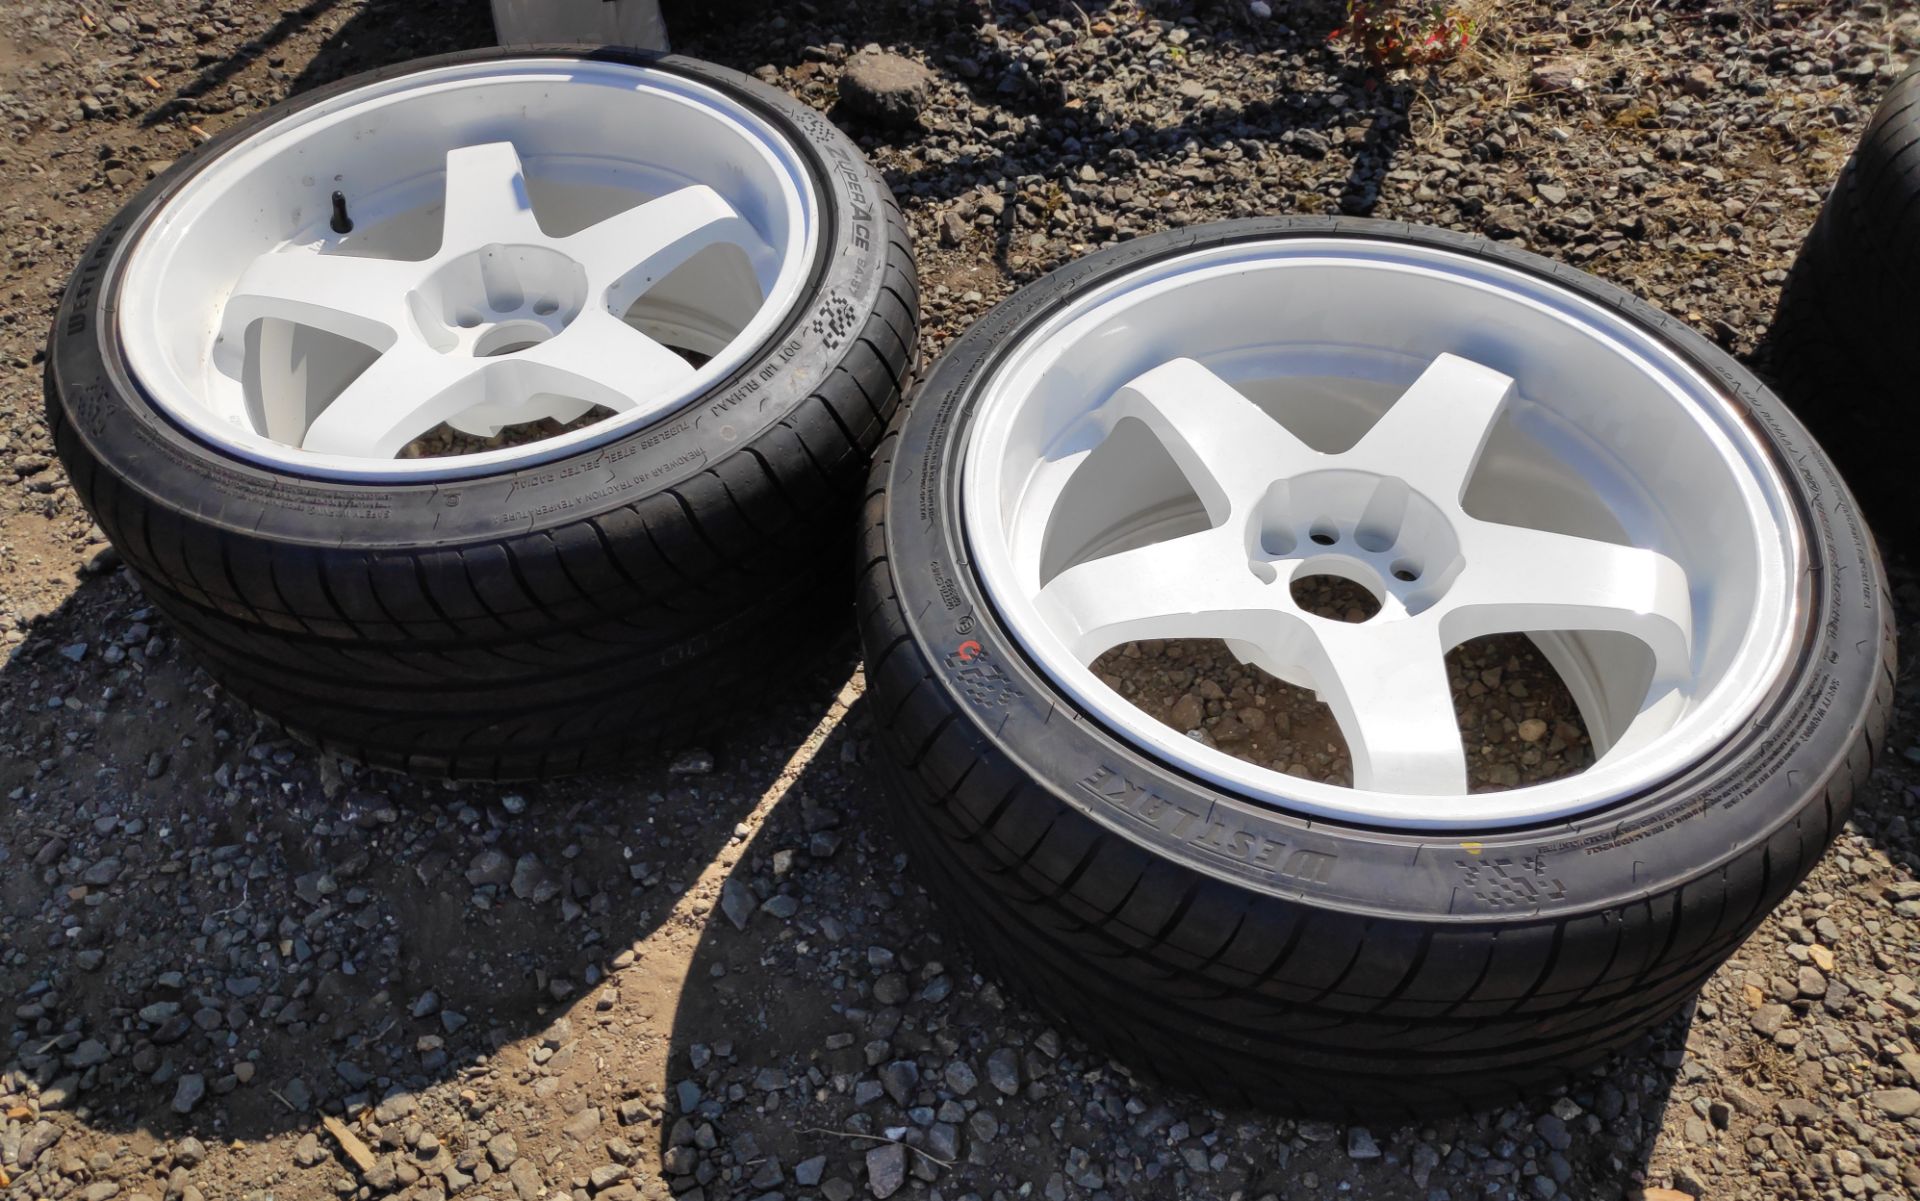 2 x White 5-Spoke 18 x 10 ET12 Wheels with 265 35 R18 Tyres For Nissan 350Z - CL682 - Location: Bedf - Image 7 of 9